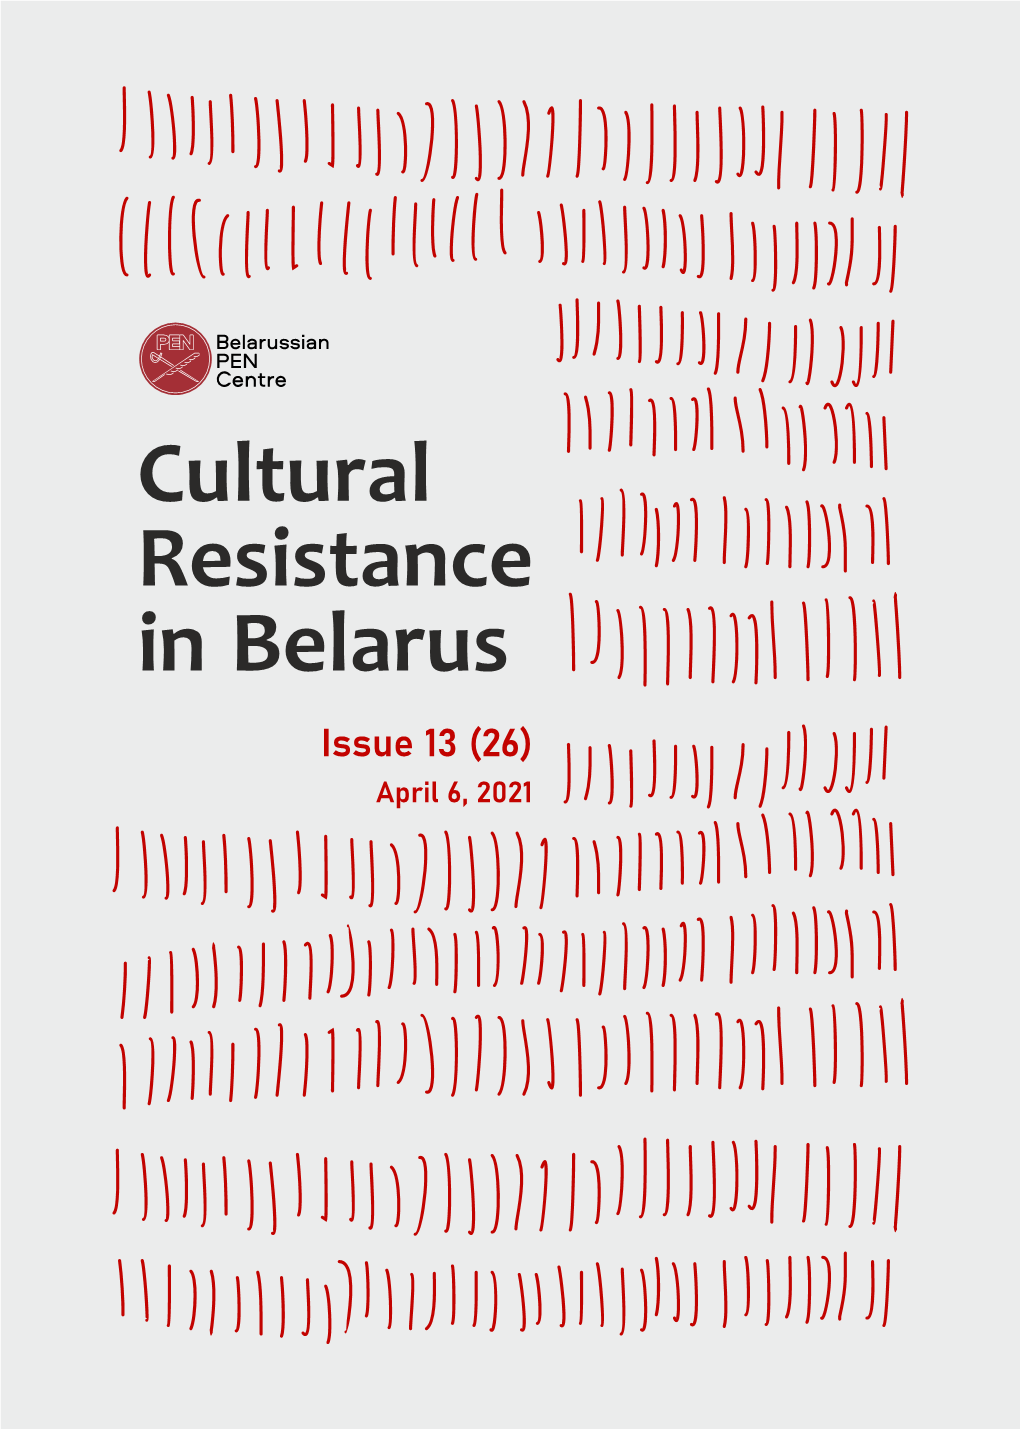 Download the Pdf-Version of Issue 26 of Cultural Resistance Monitoring